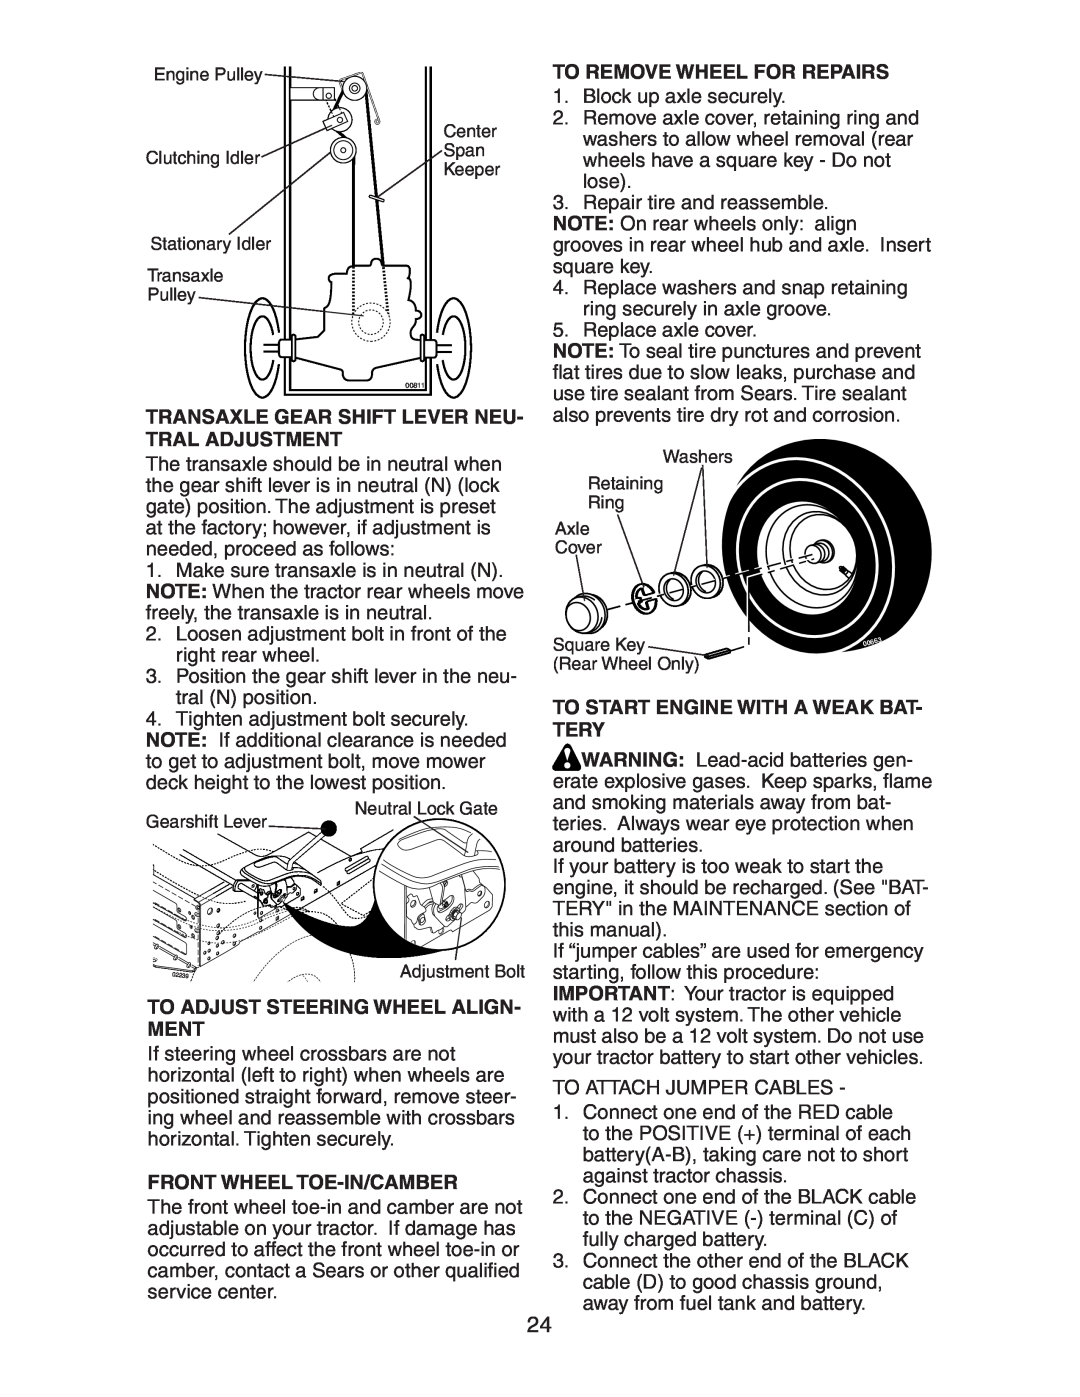 Craftsman 917.27581 owner manual To Remove Wheel For Repairs, Transaxle Gear Shift Lever Neu- Tral Adjustment 